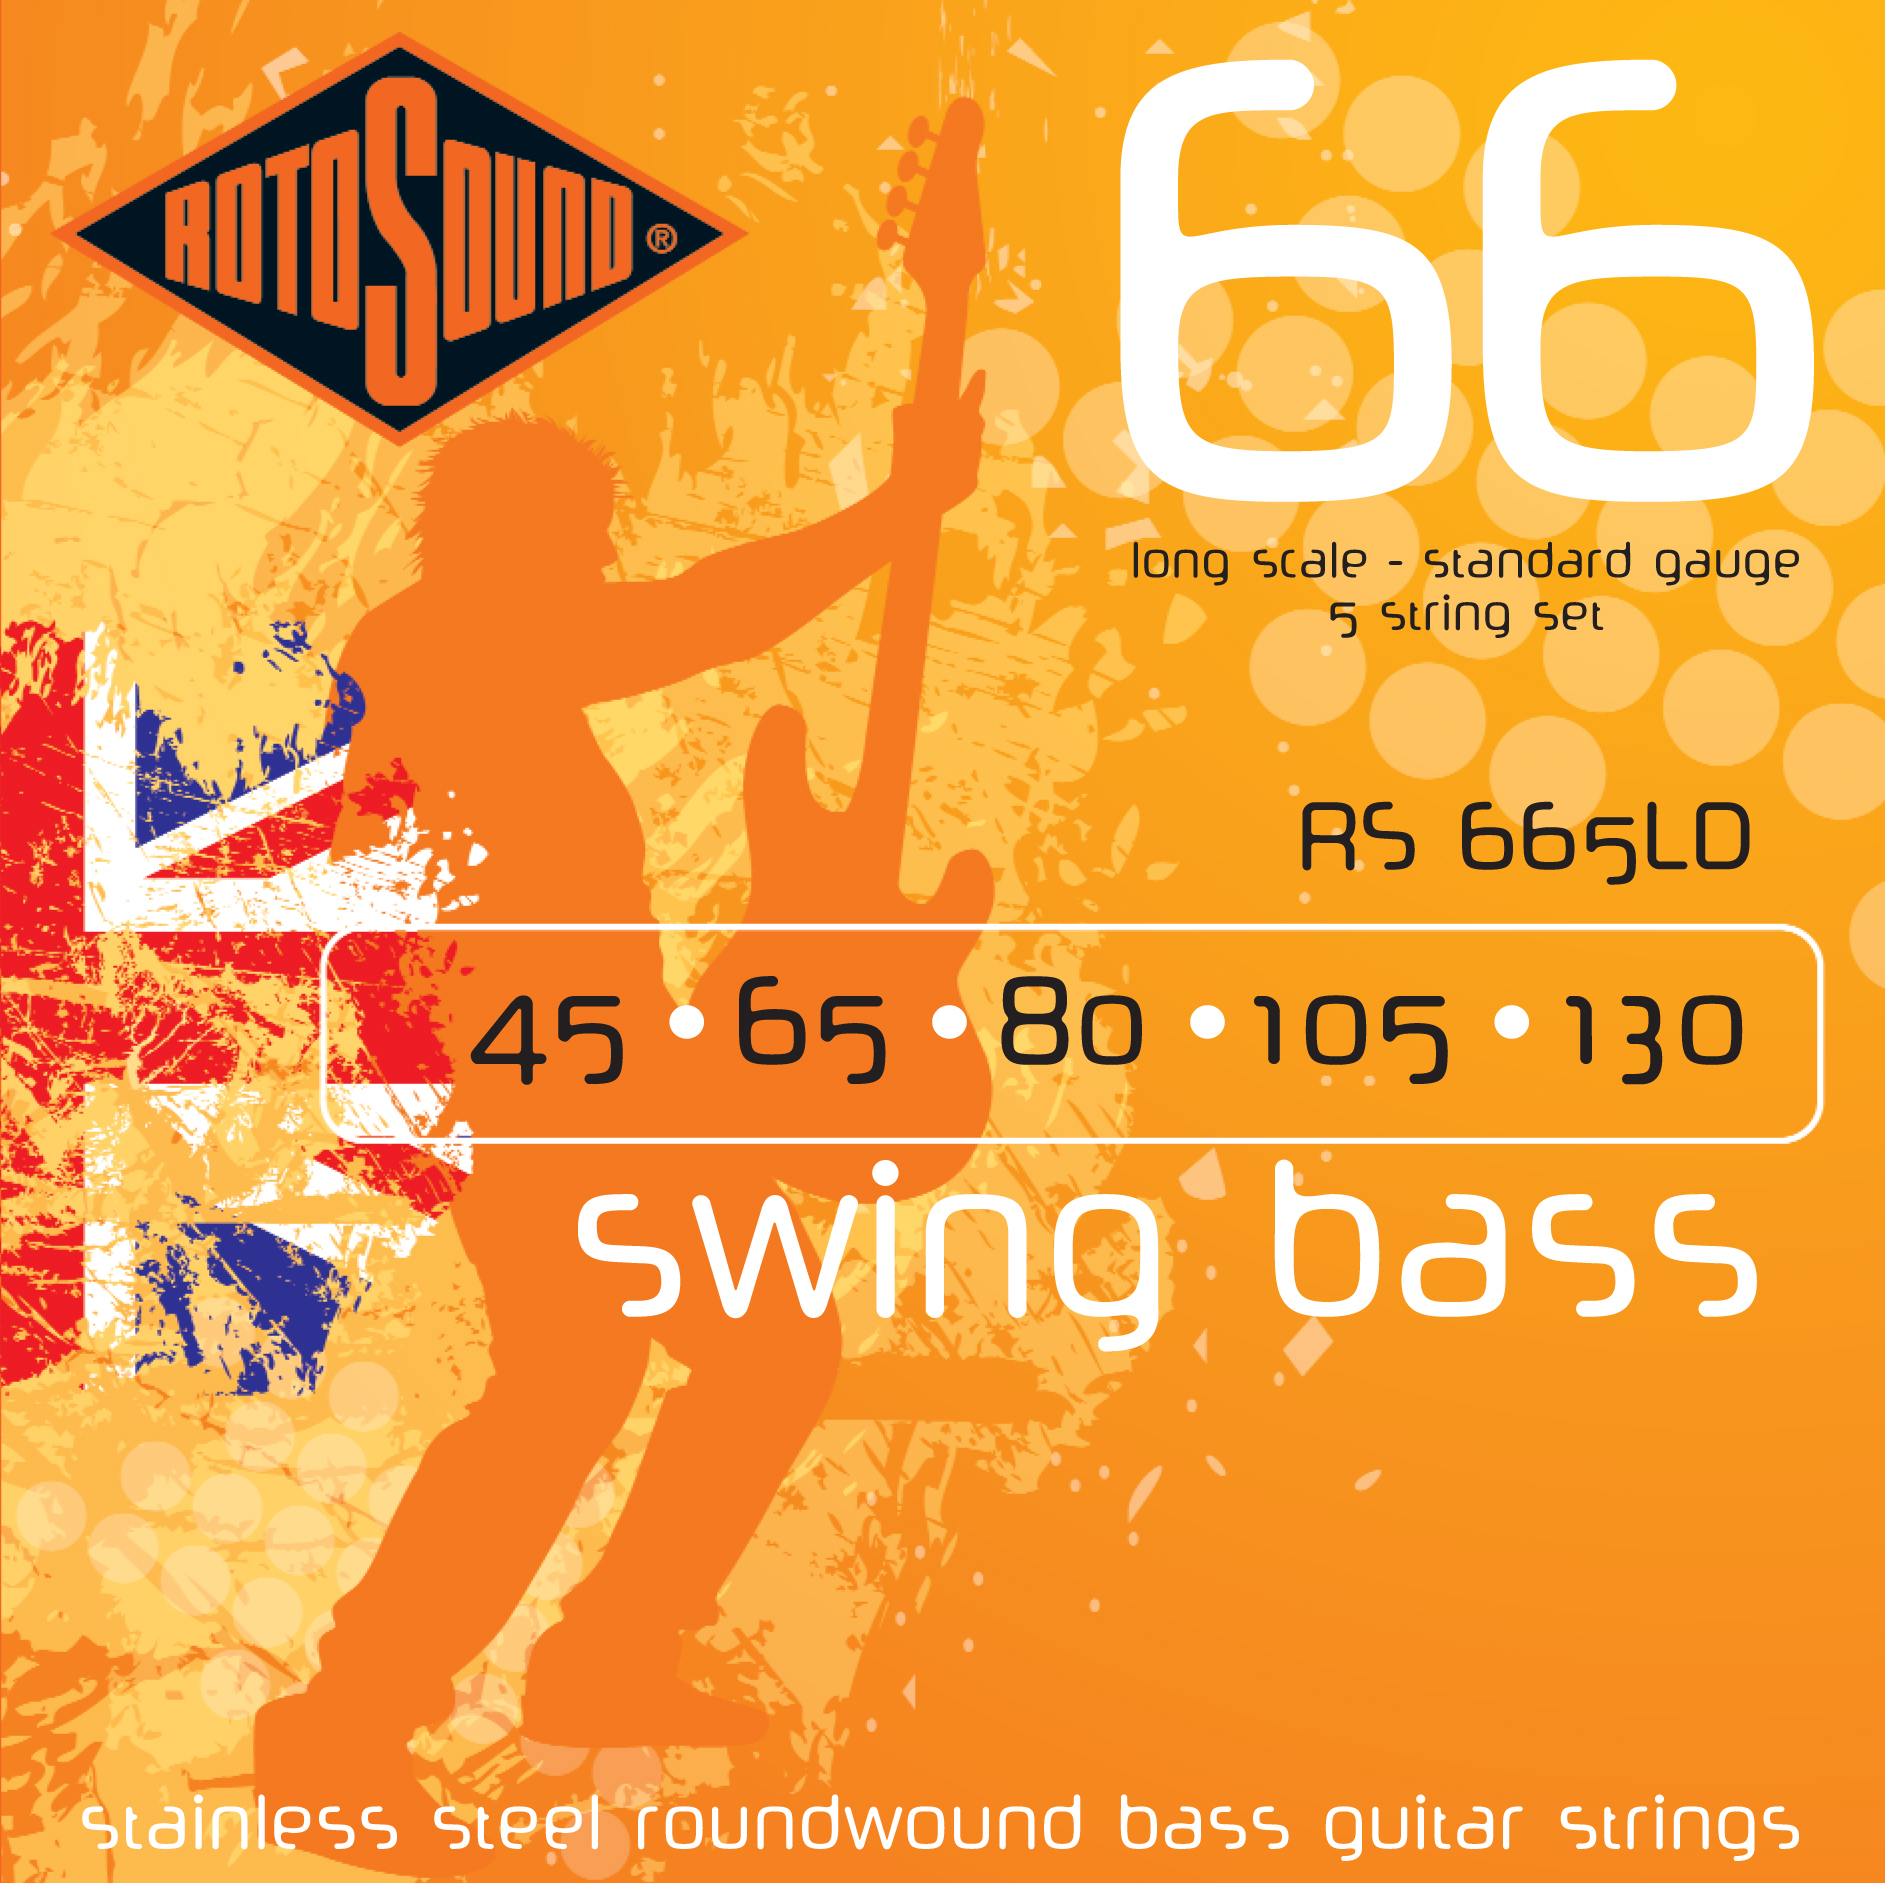 Rotosound Rotosound Swing 66 RS665 5-String Long Scale Bass Guitar Strings (45-130)